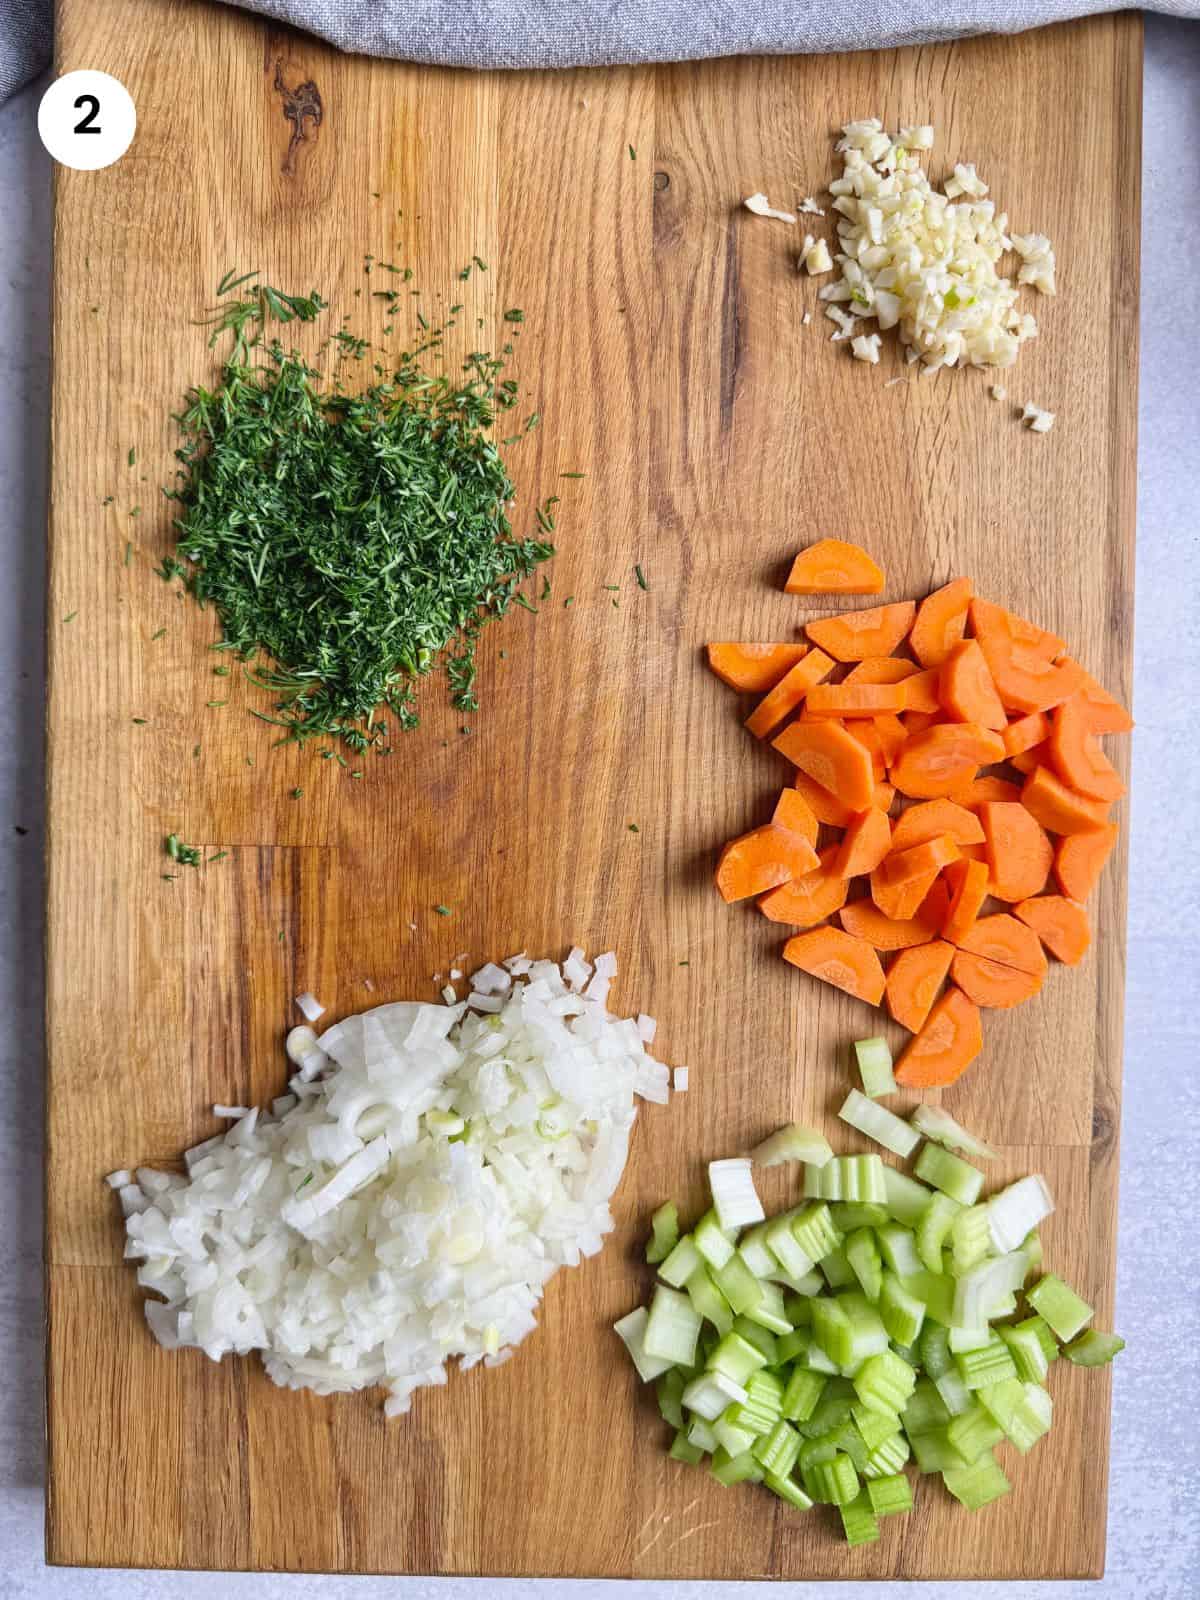 Chopped vegetables on a wooden board.